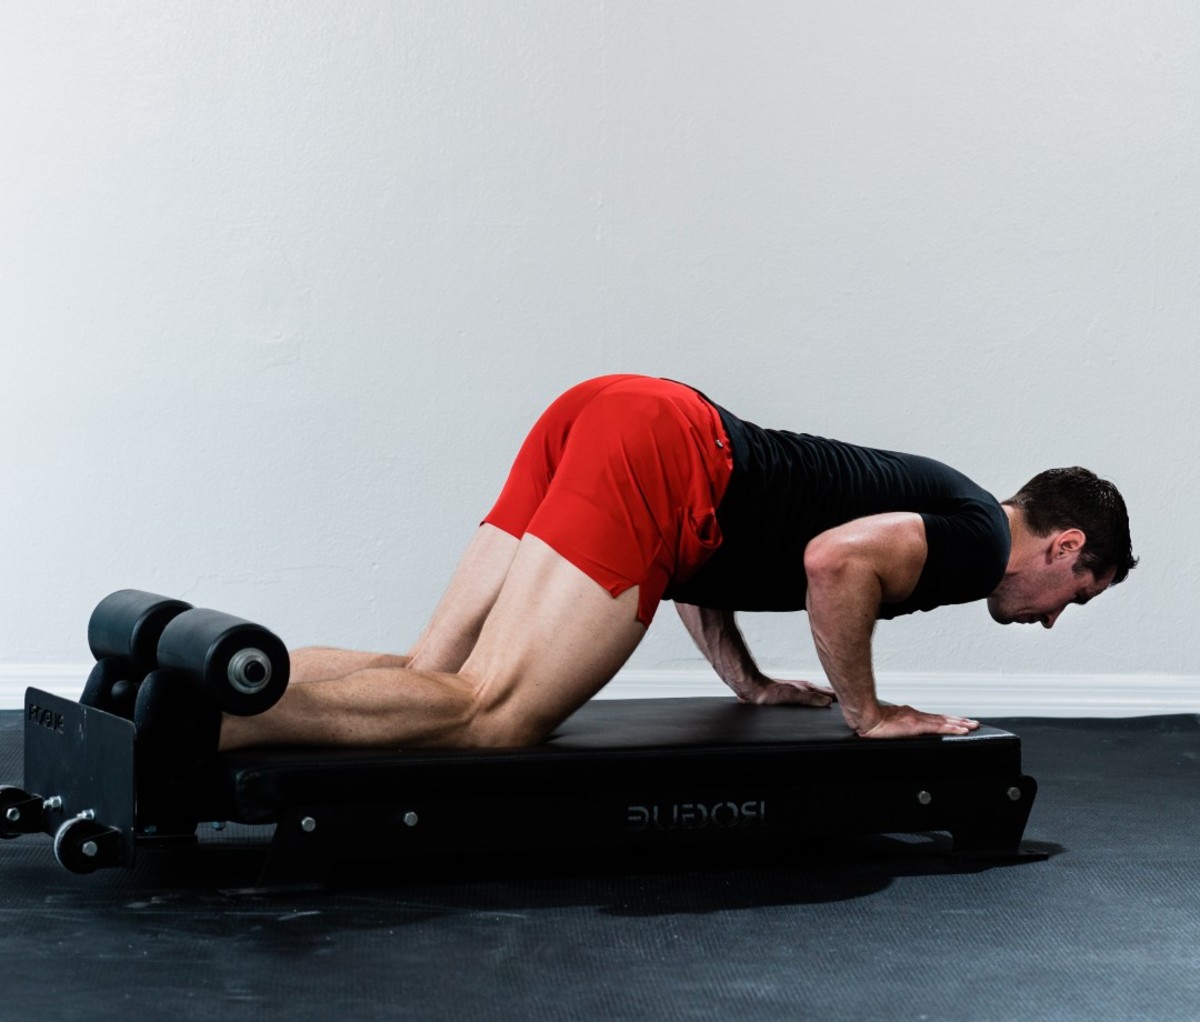 Caucasian man in black t-shirt and red shorts doing nordic hamstring curls